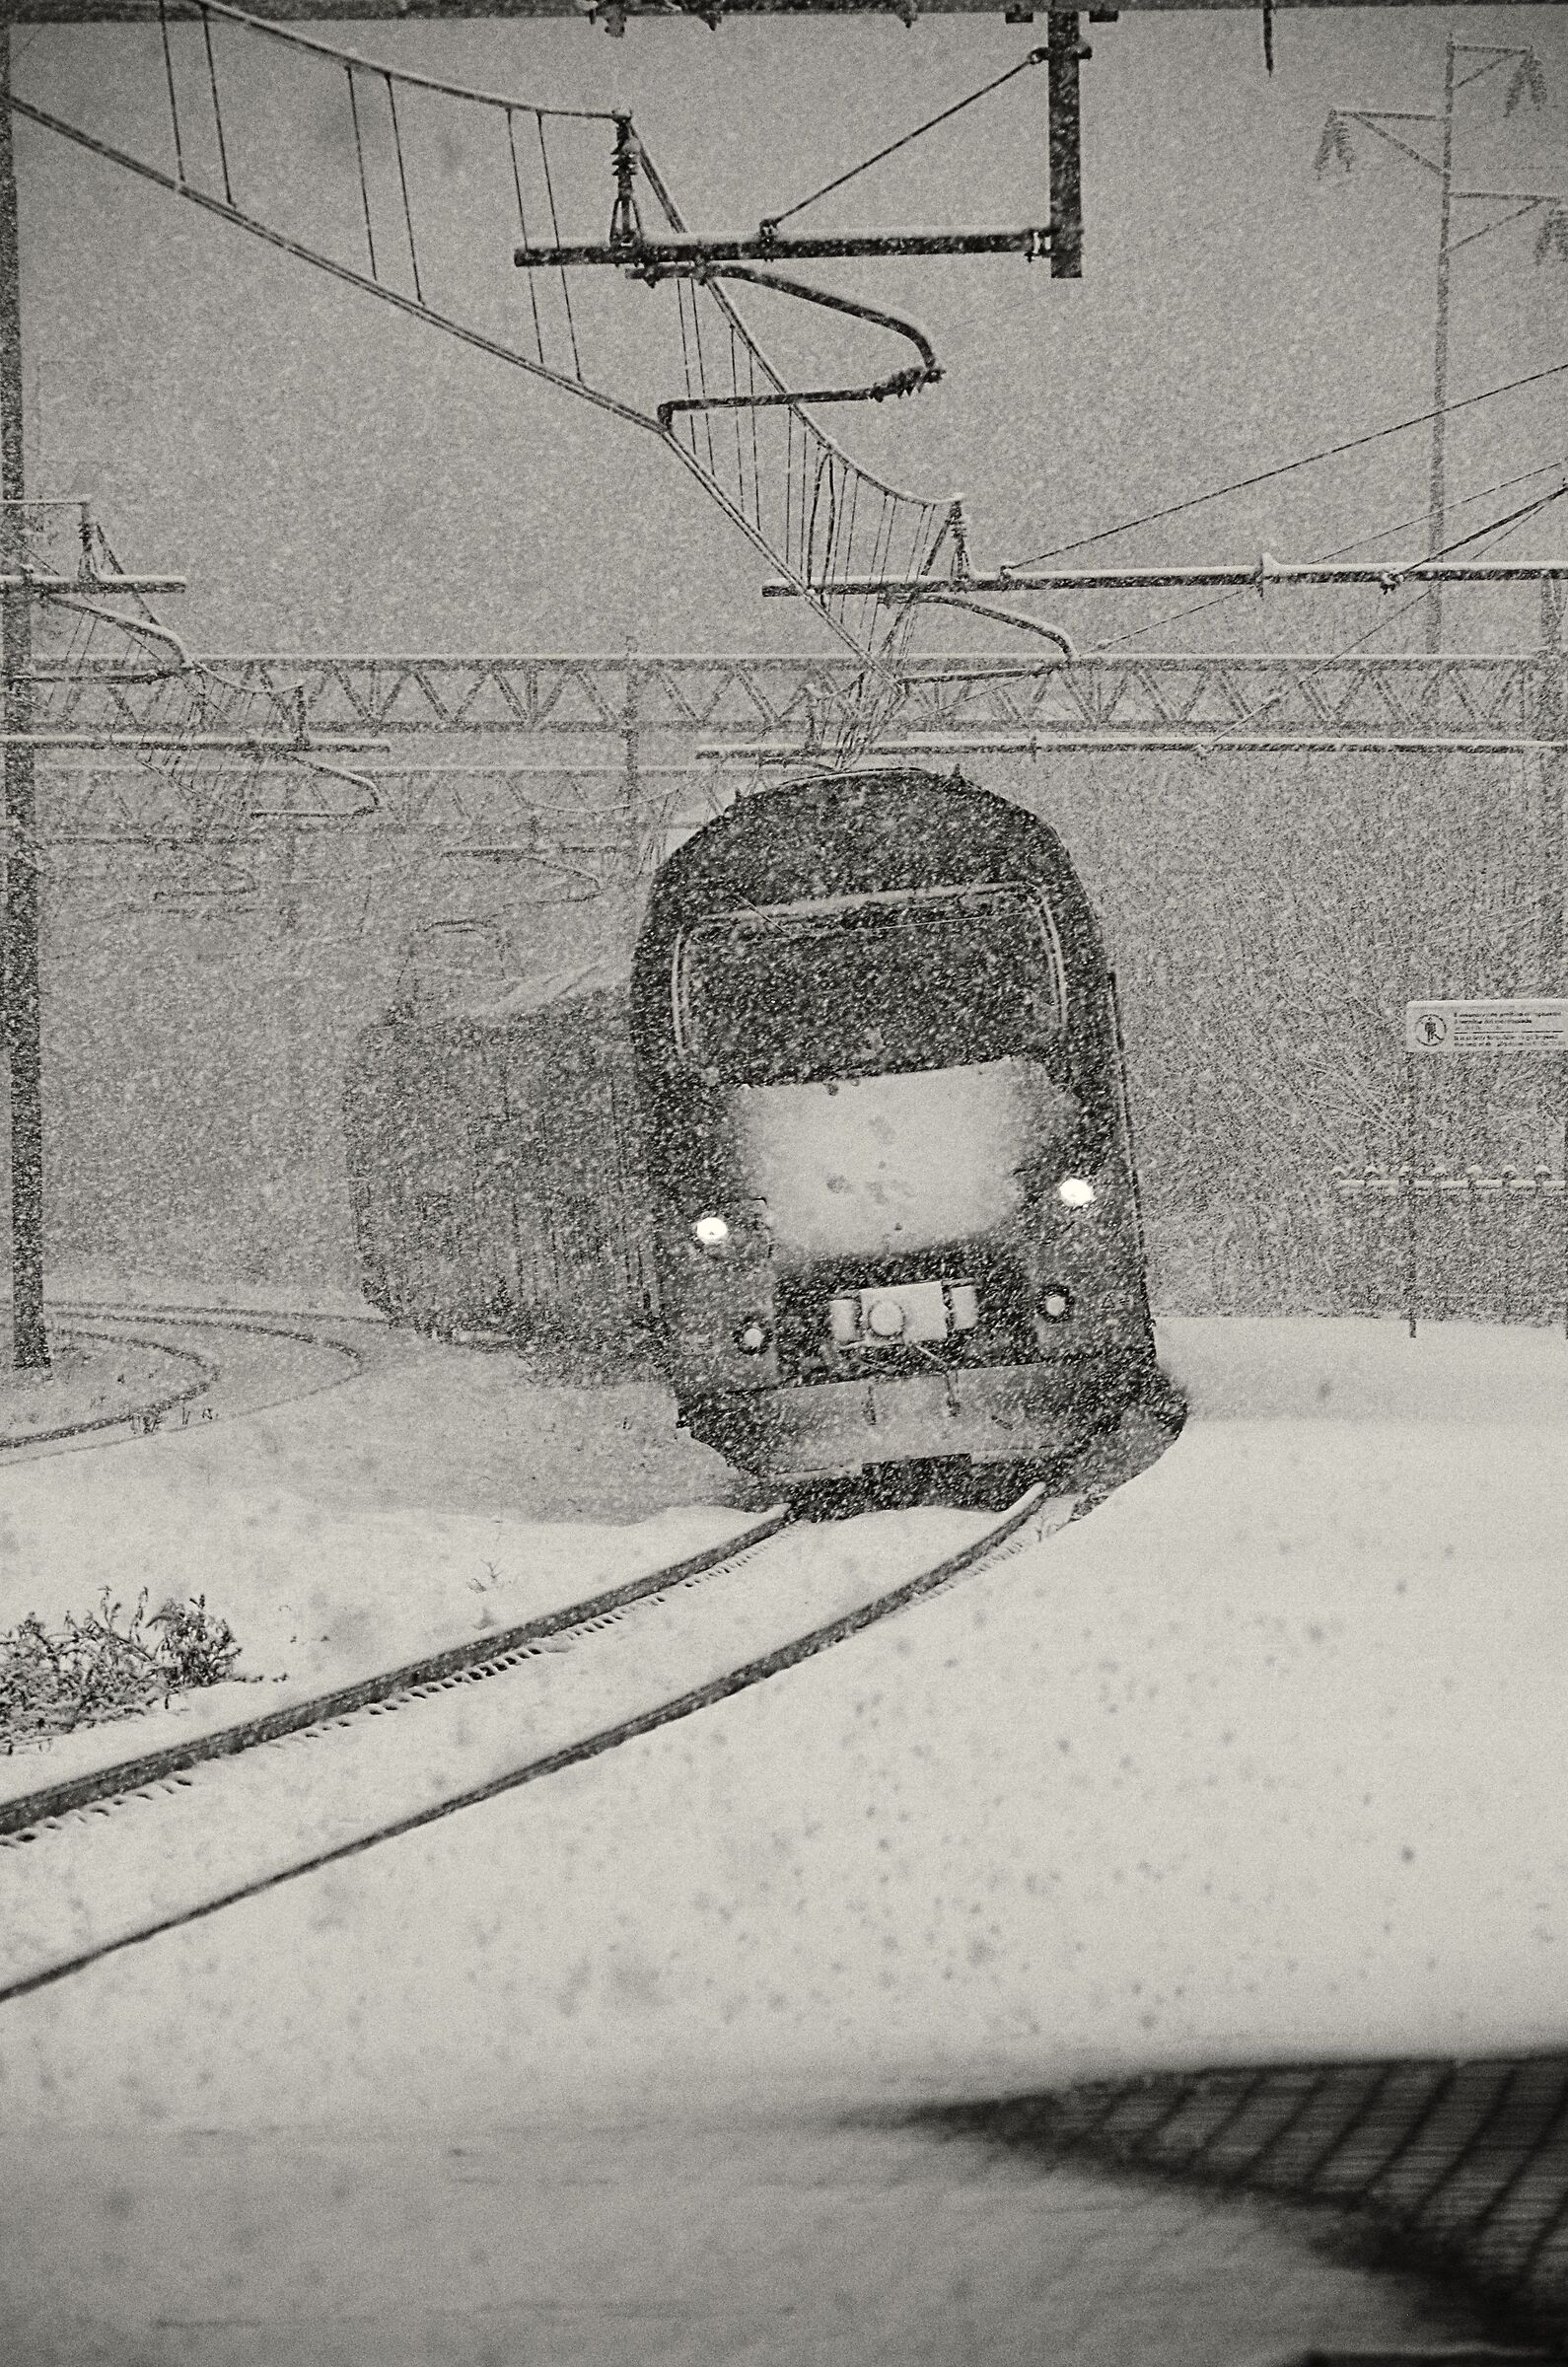 Under the snow the train arrives ......